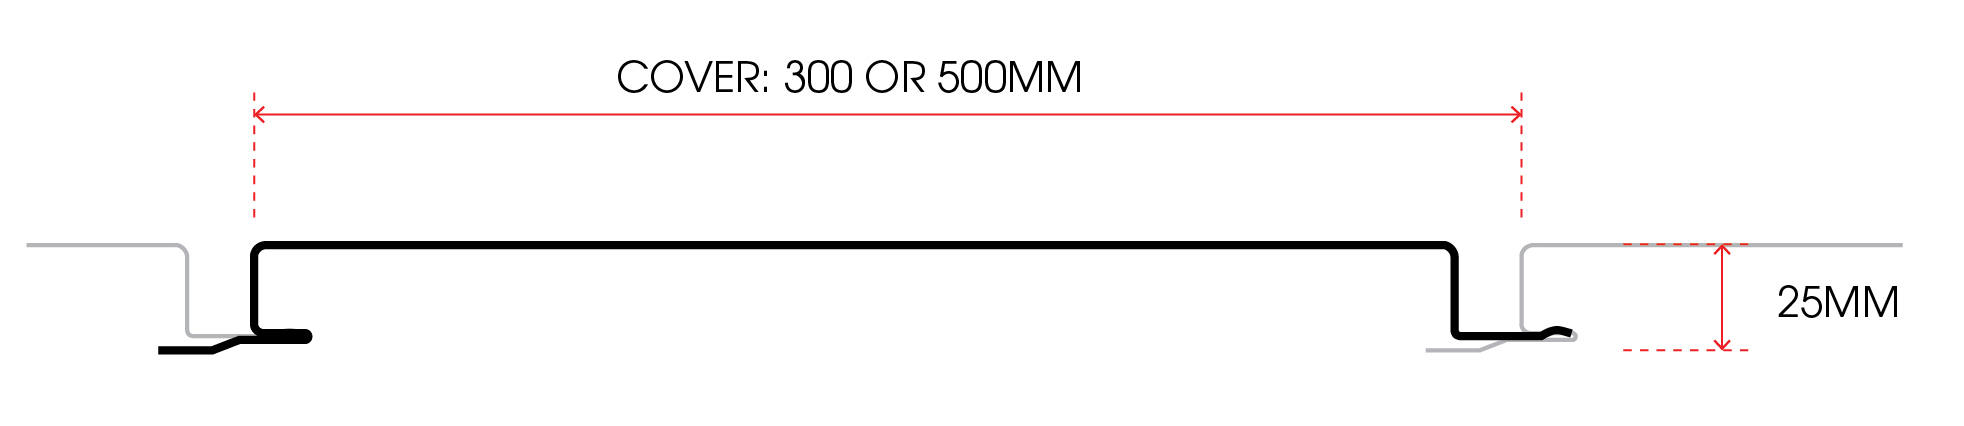 No1 Roofing Expression profile dimensions